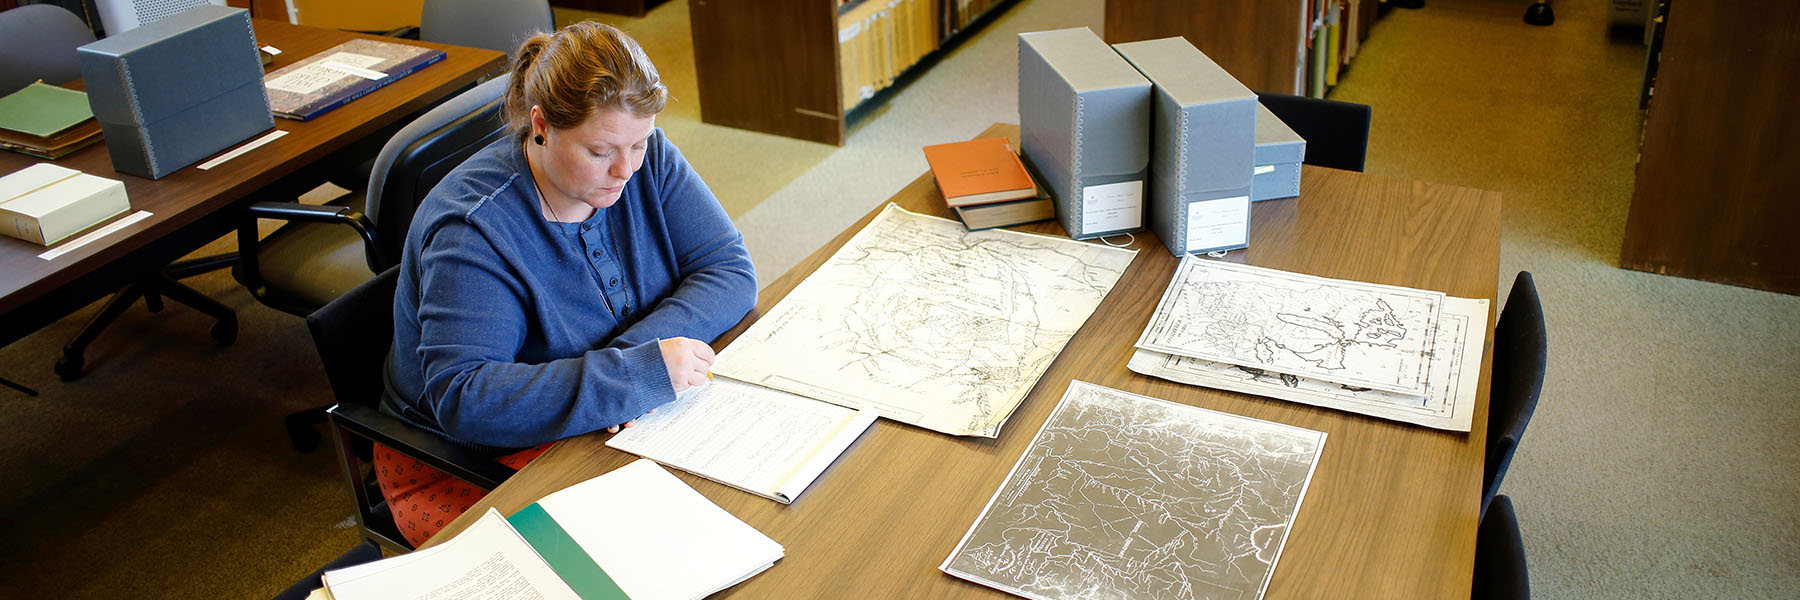 Image of a women sitting at a table looking at maps and documents.